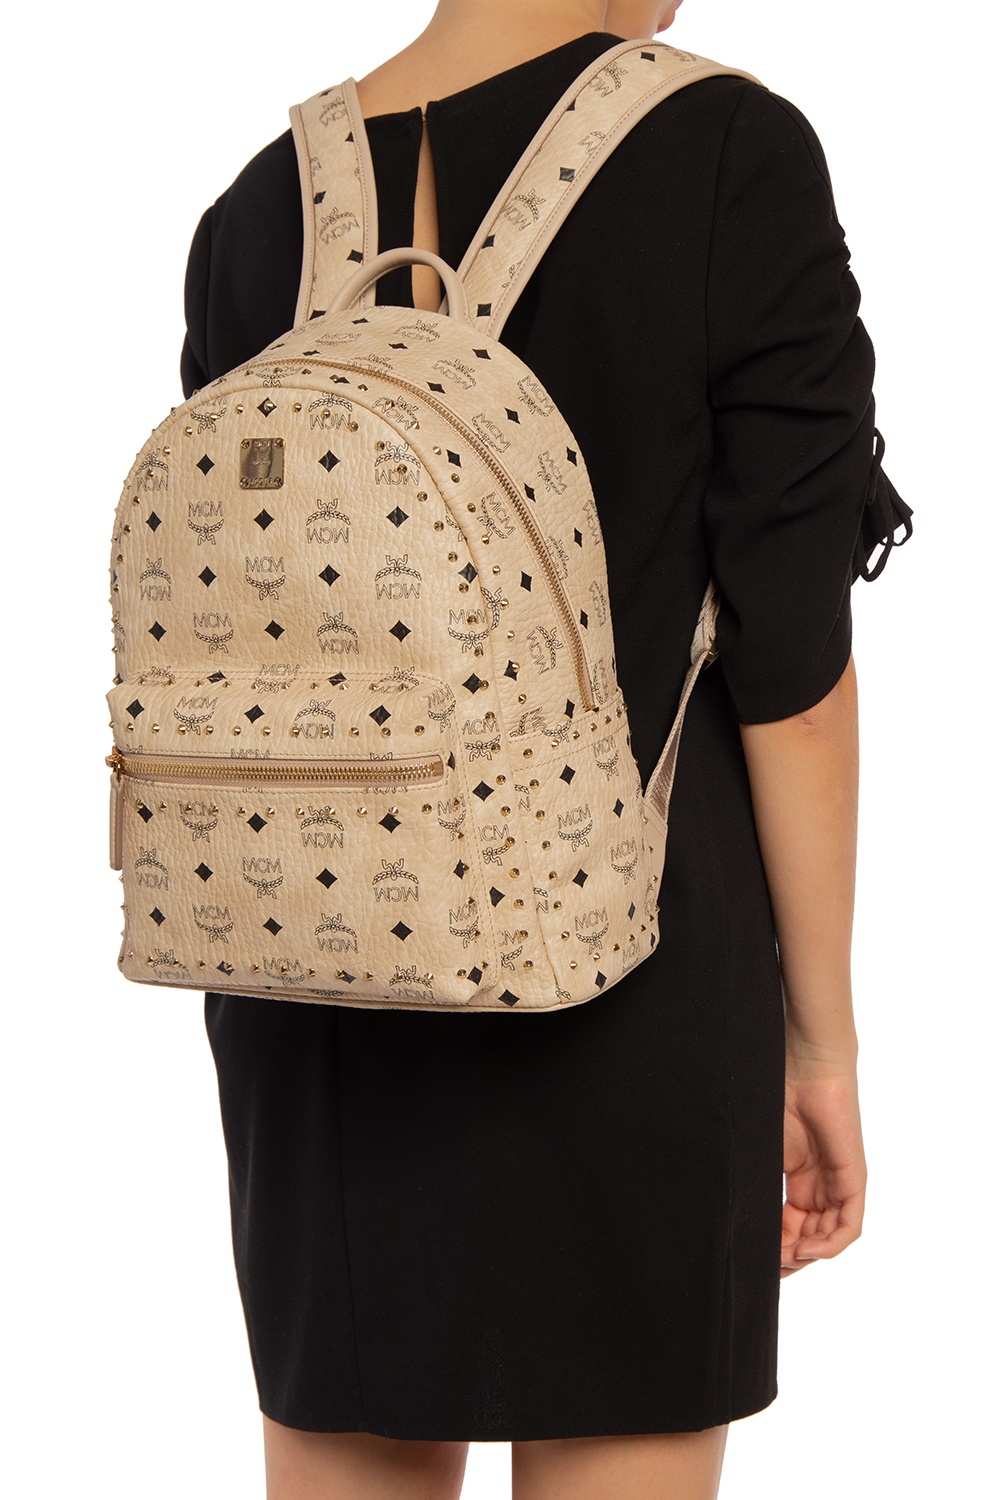 MCM Mini Stark Backpack  Backpack outfit, Teenage fashion outfits